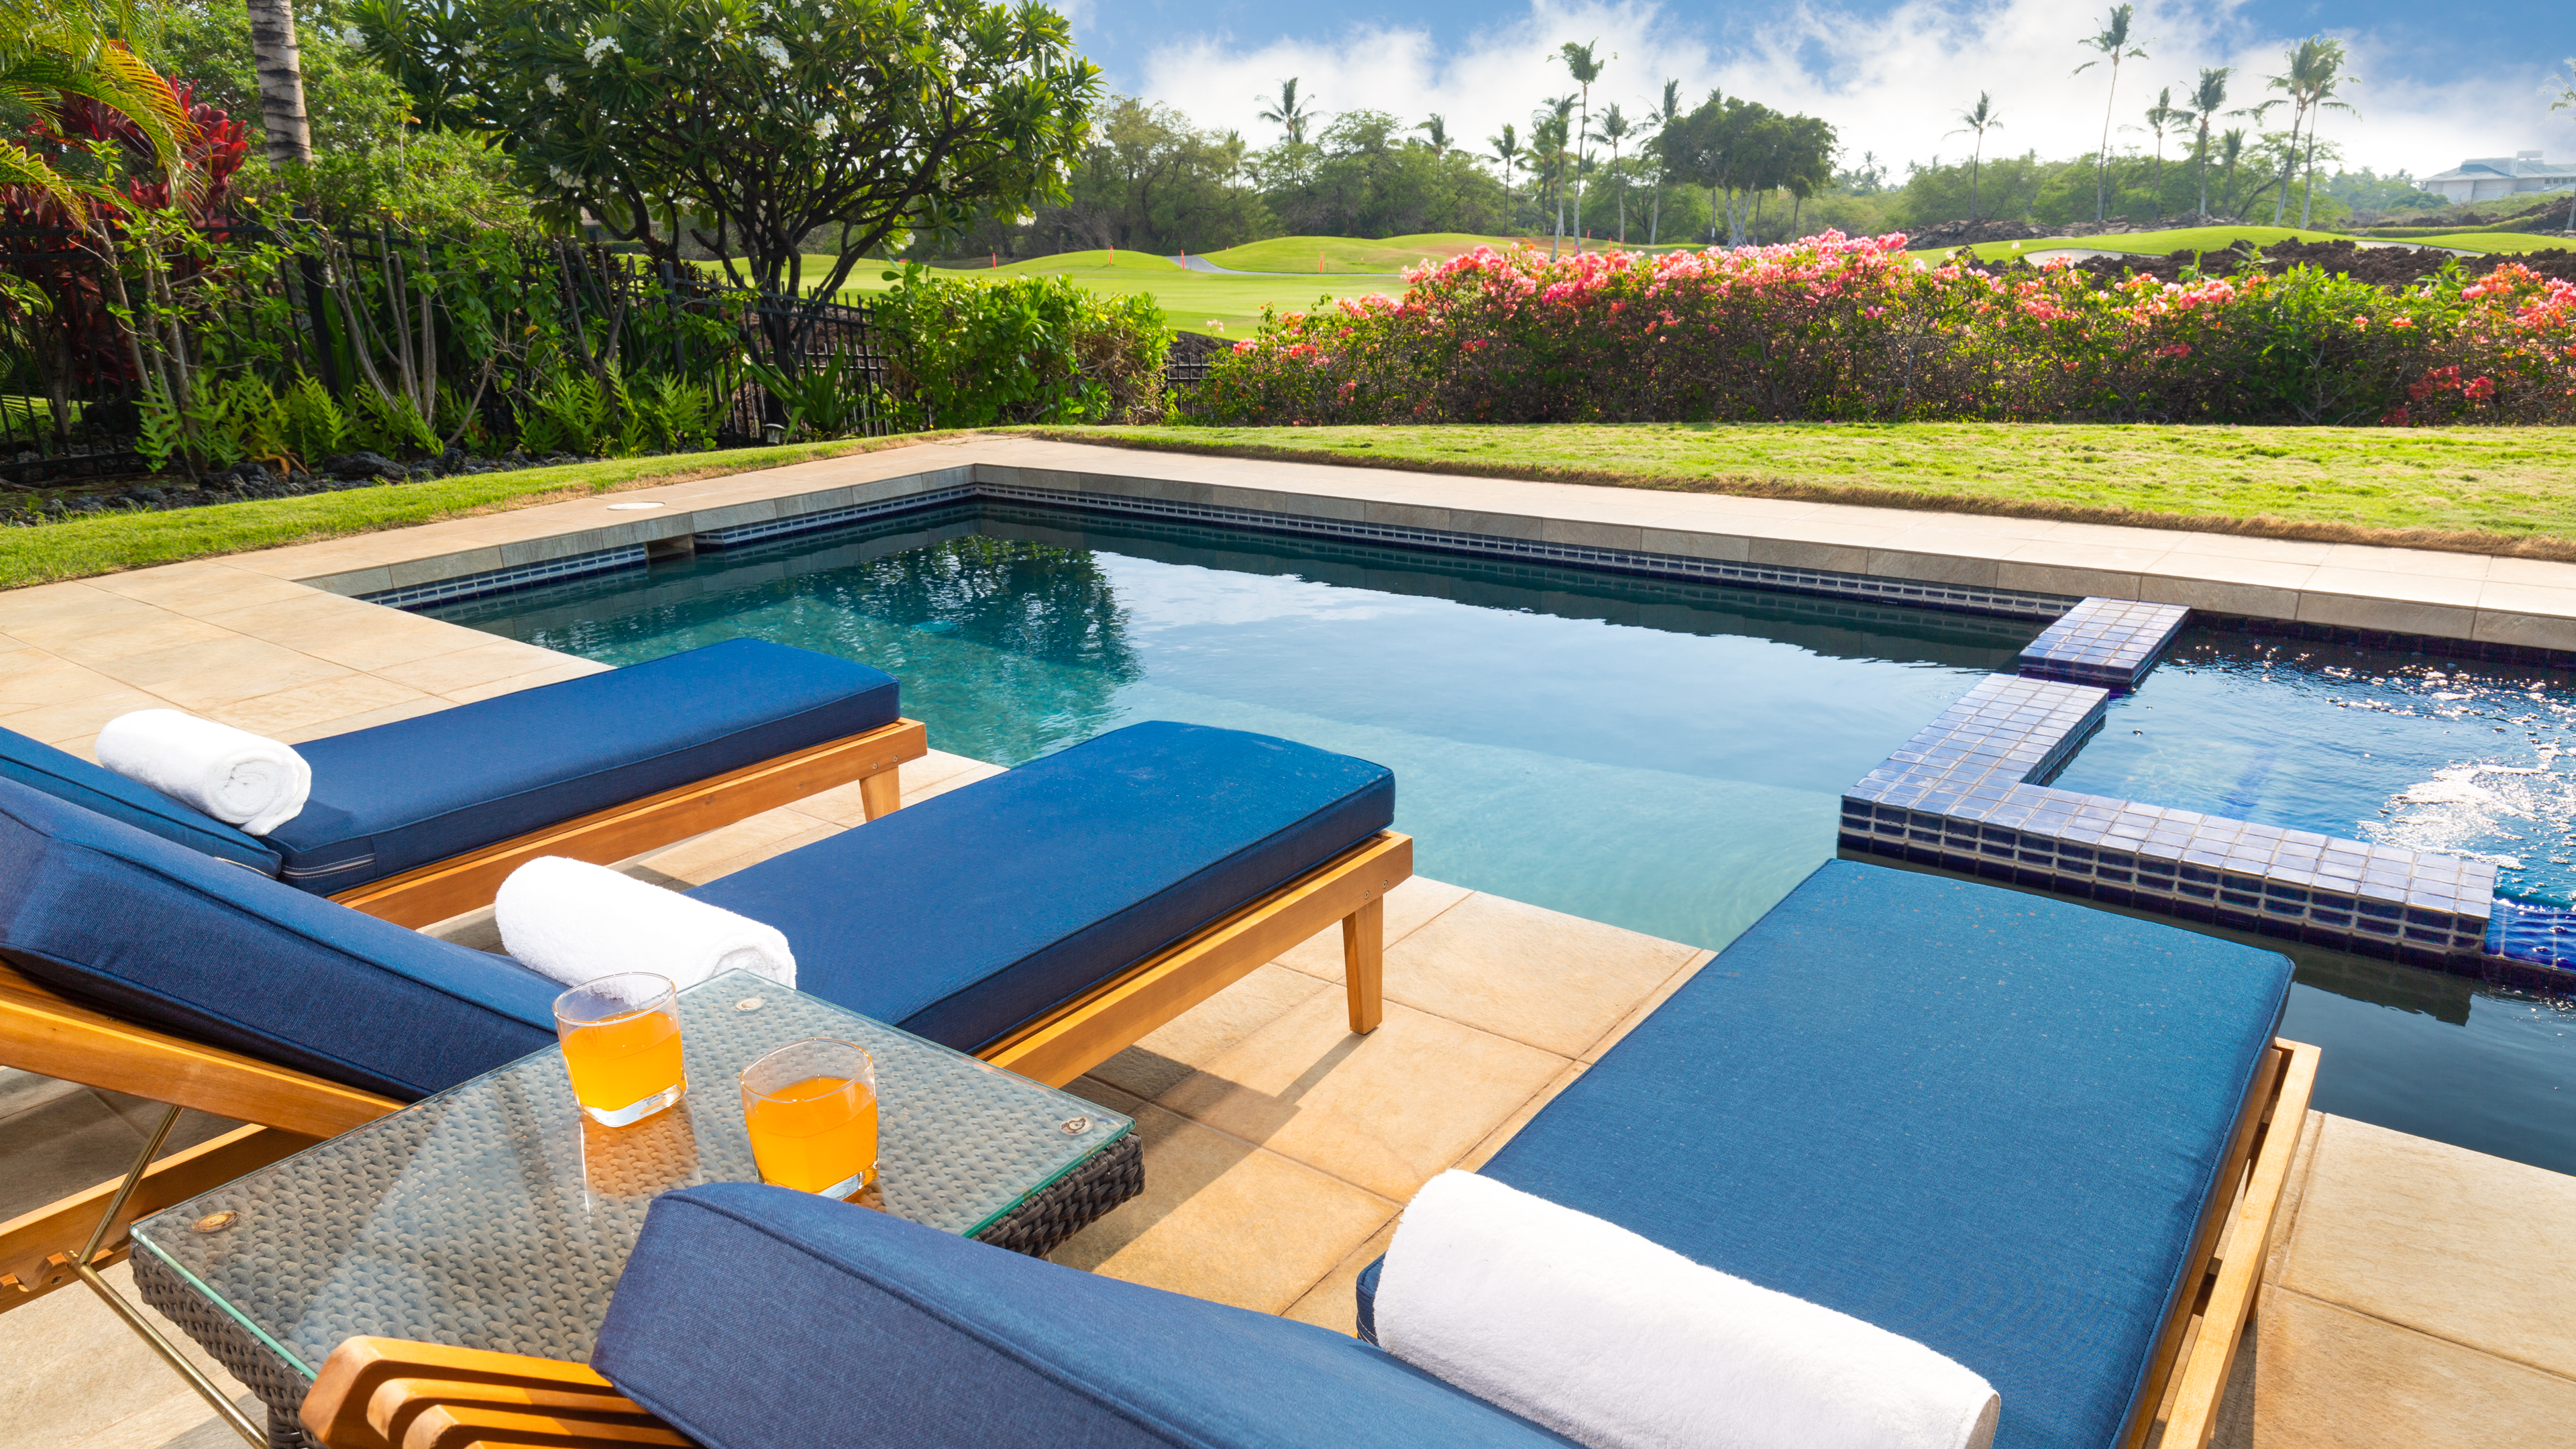 Four new chaise loungers next by private pool